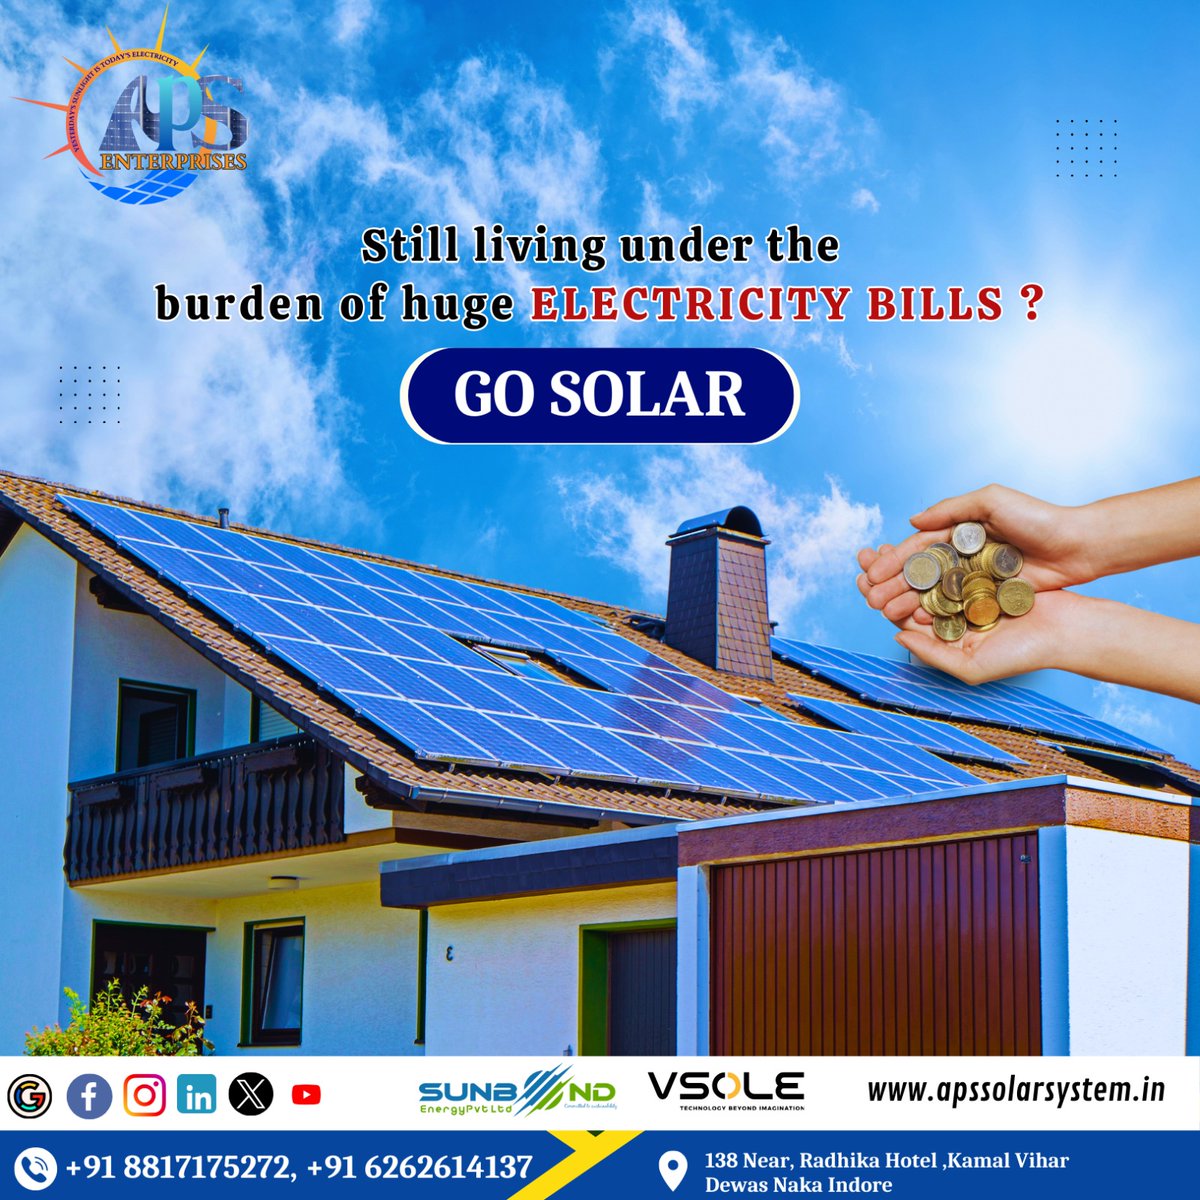 Harnessing the power of the sun with APS Enterprises ☀️ Clean energy for a brighter tomorrow. #SolarPower #RenewableEnergy #GoGreen #sustainableliving
.
.
.
#APSEnterprises #SolarPower #GoGreen #SolarPower #CleanEnergy #RenewableFuture #Sustainability #EcoFriendly #GoGreen